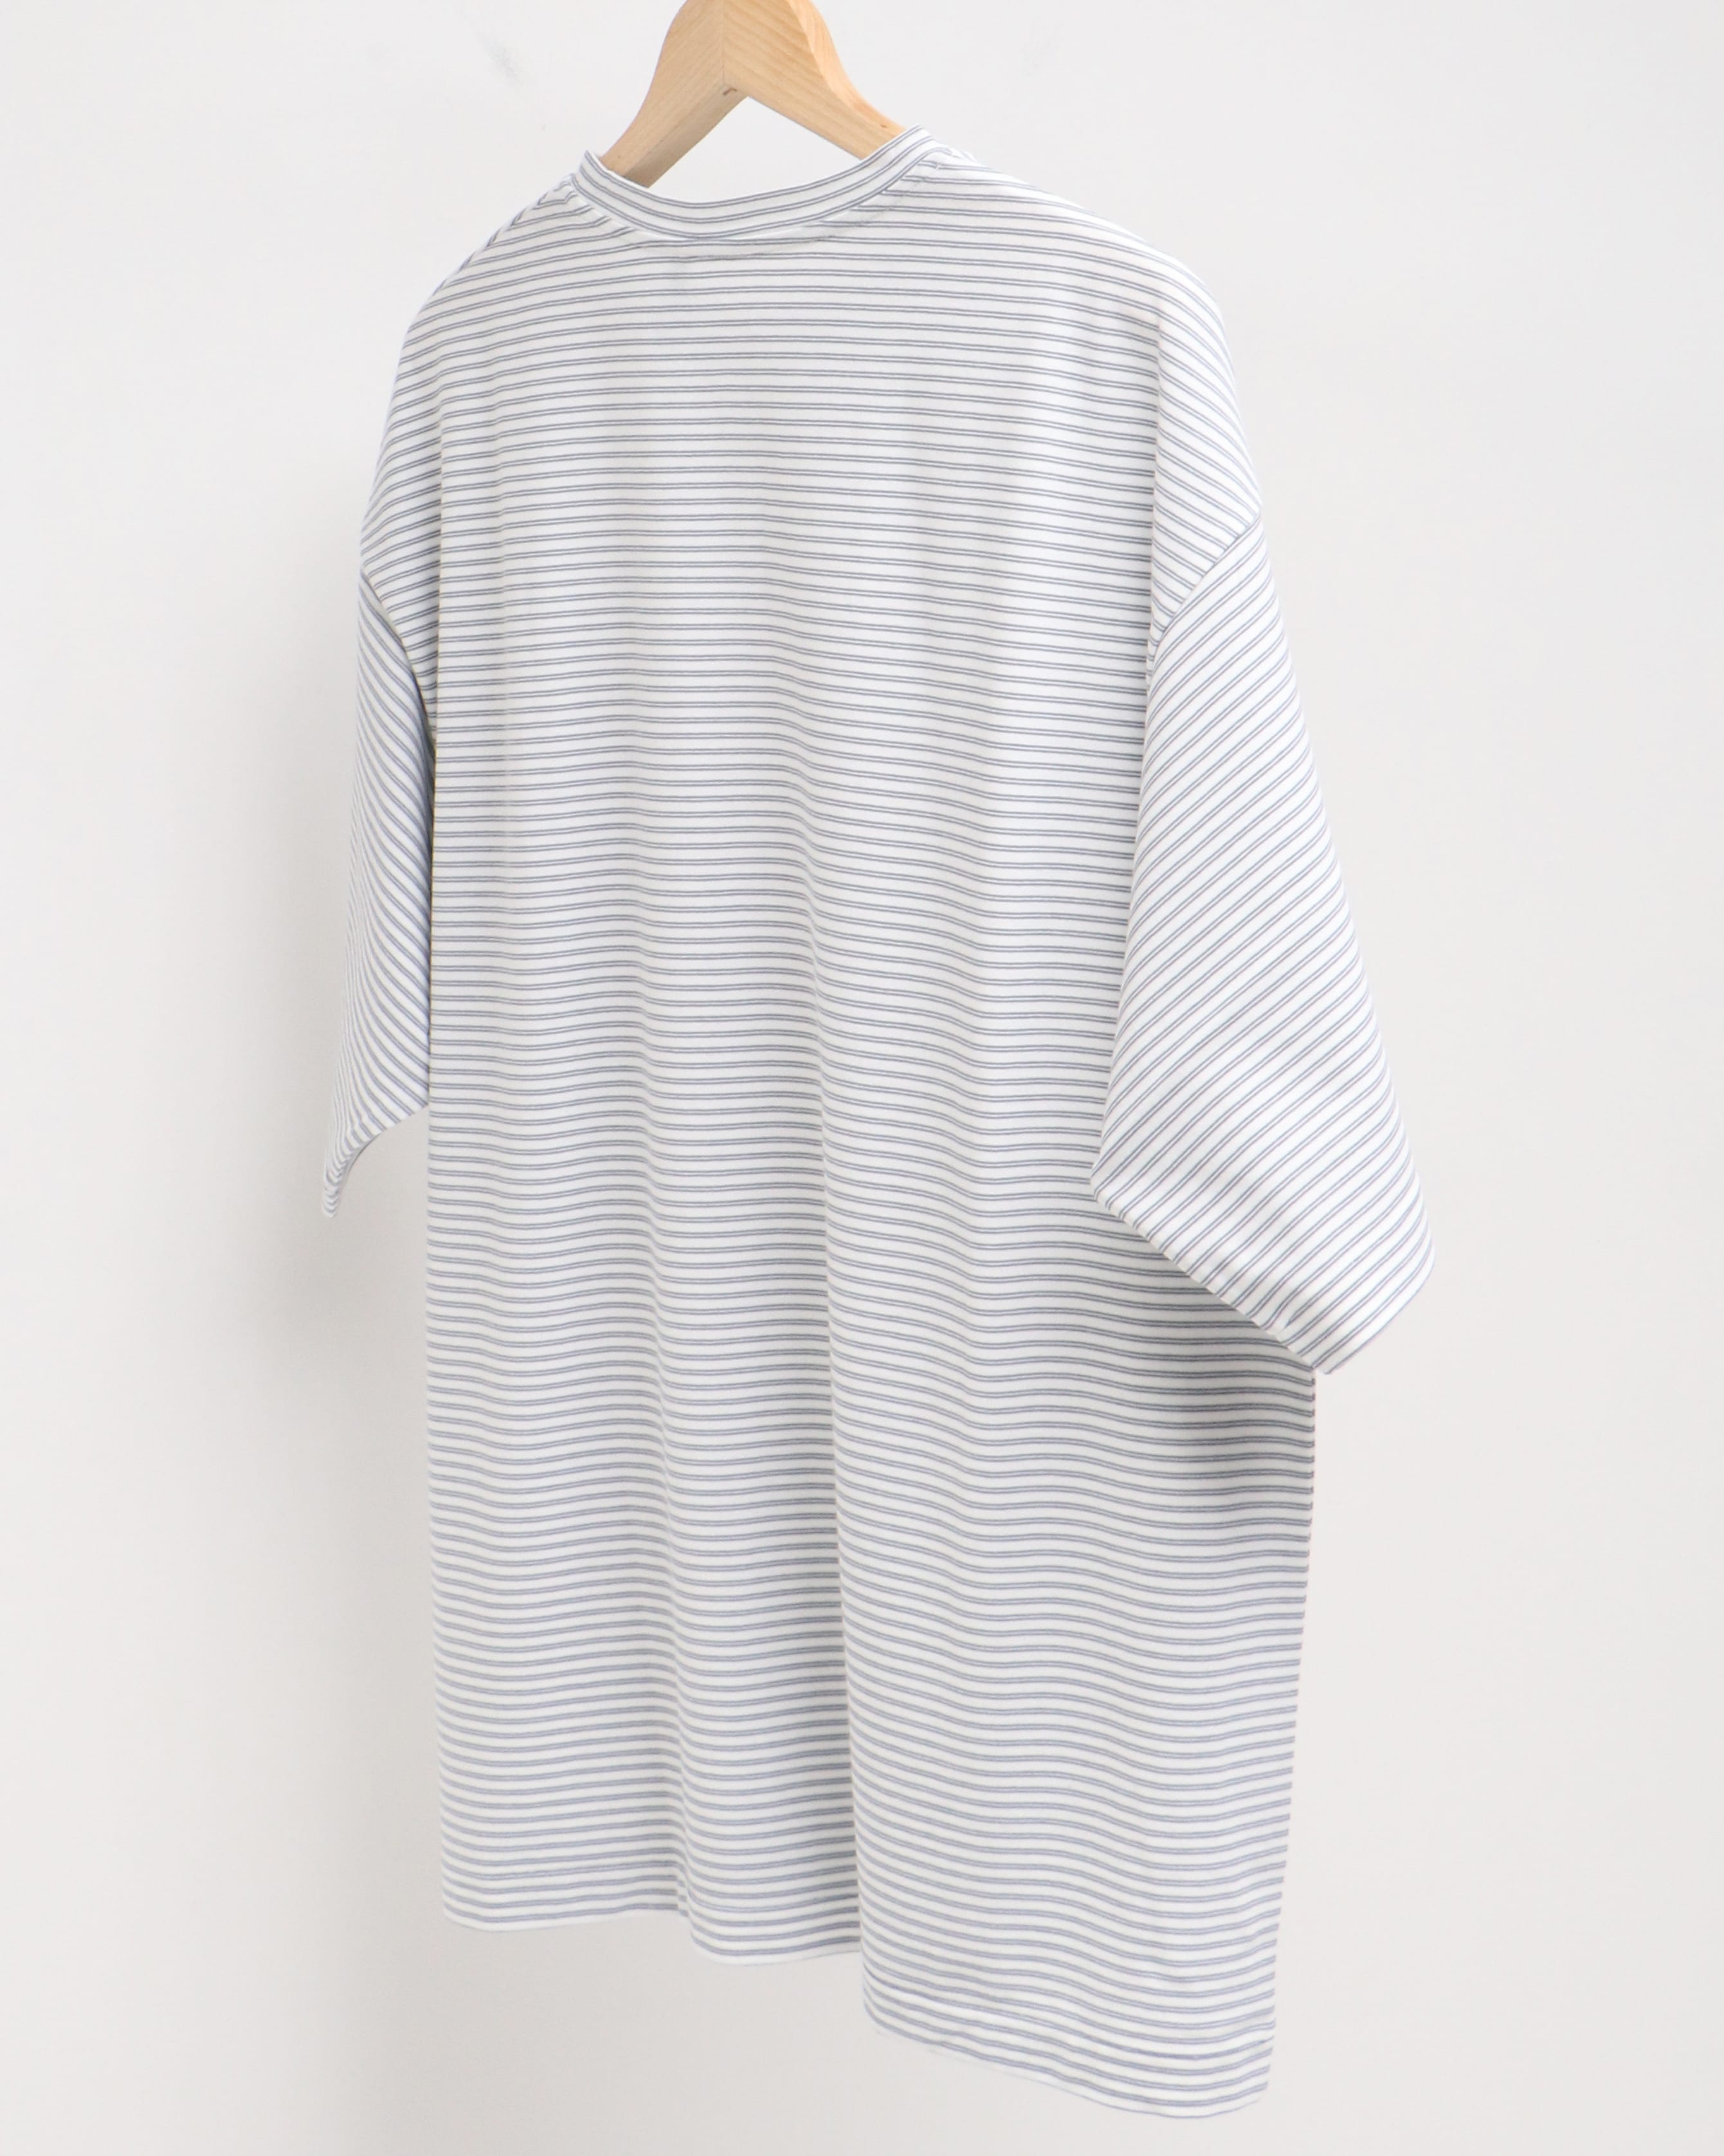 Hard Twisted Border Jersey S/S Tee WHITE BORDER